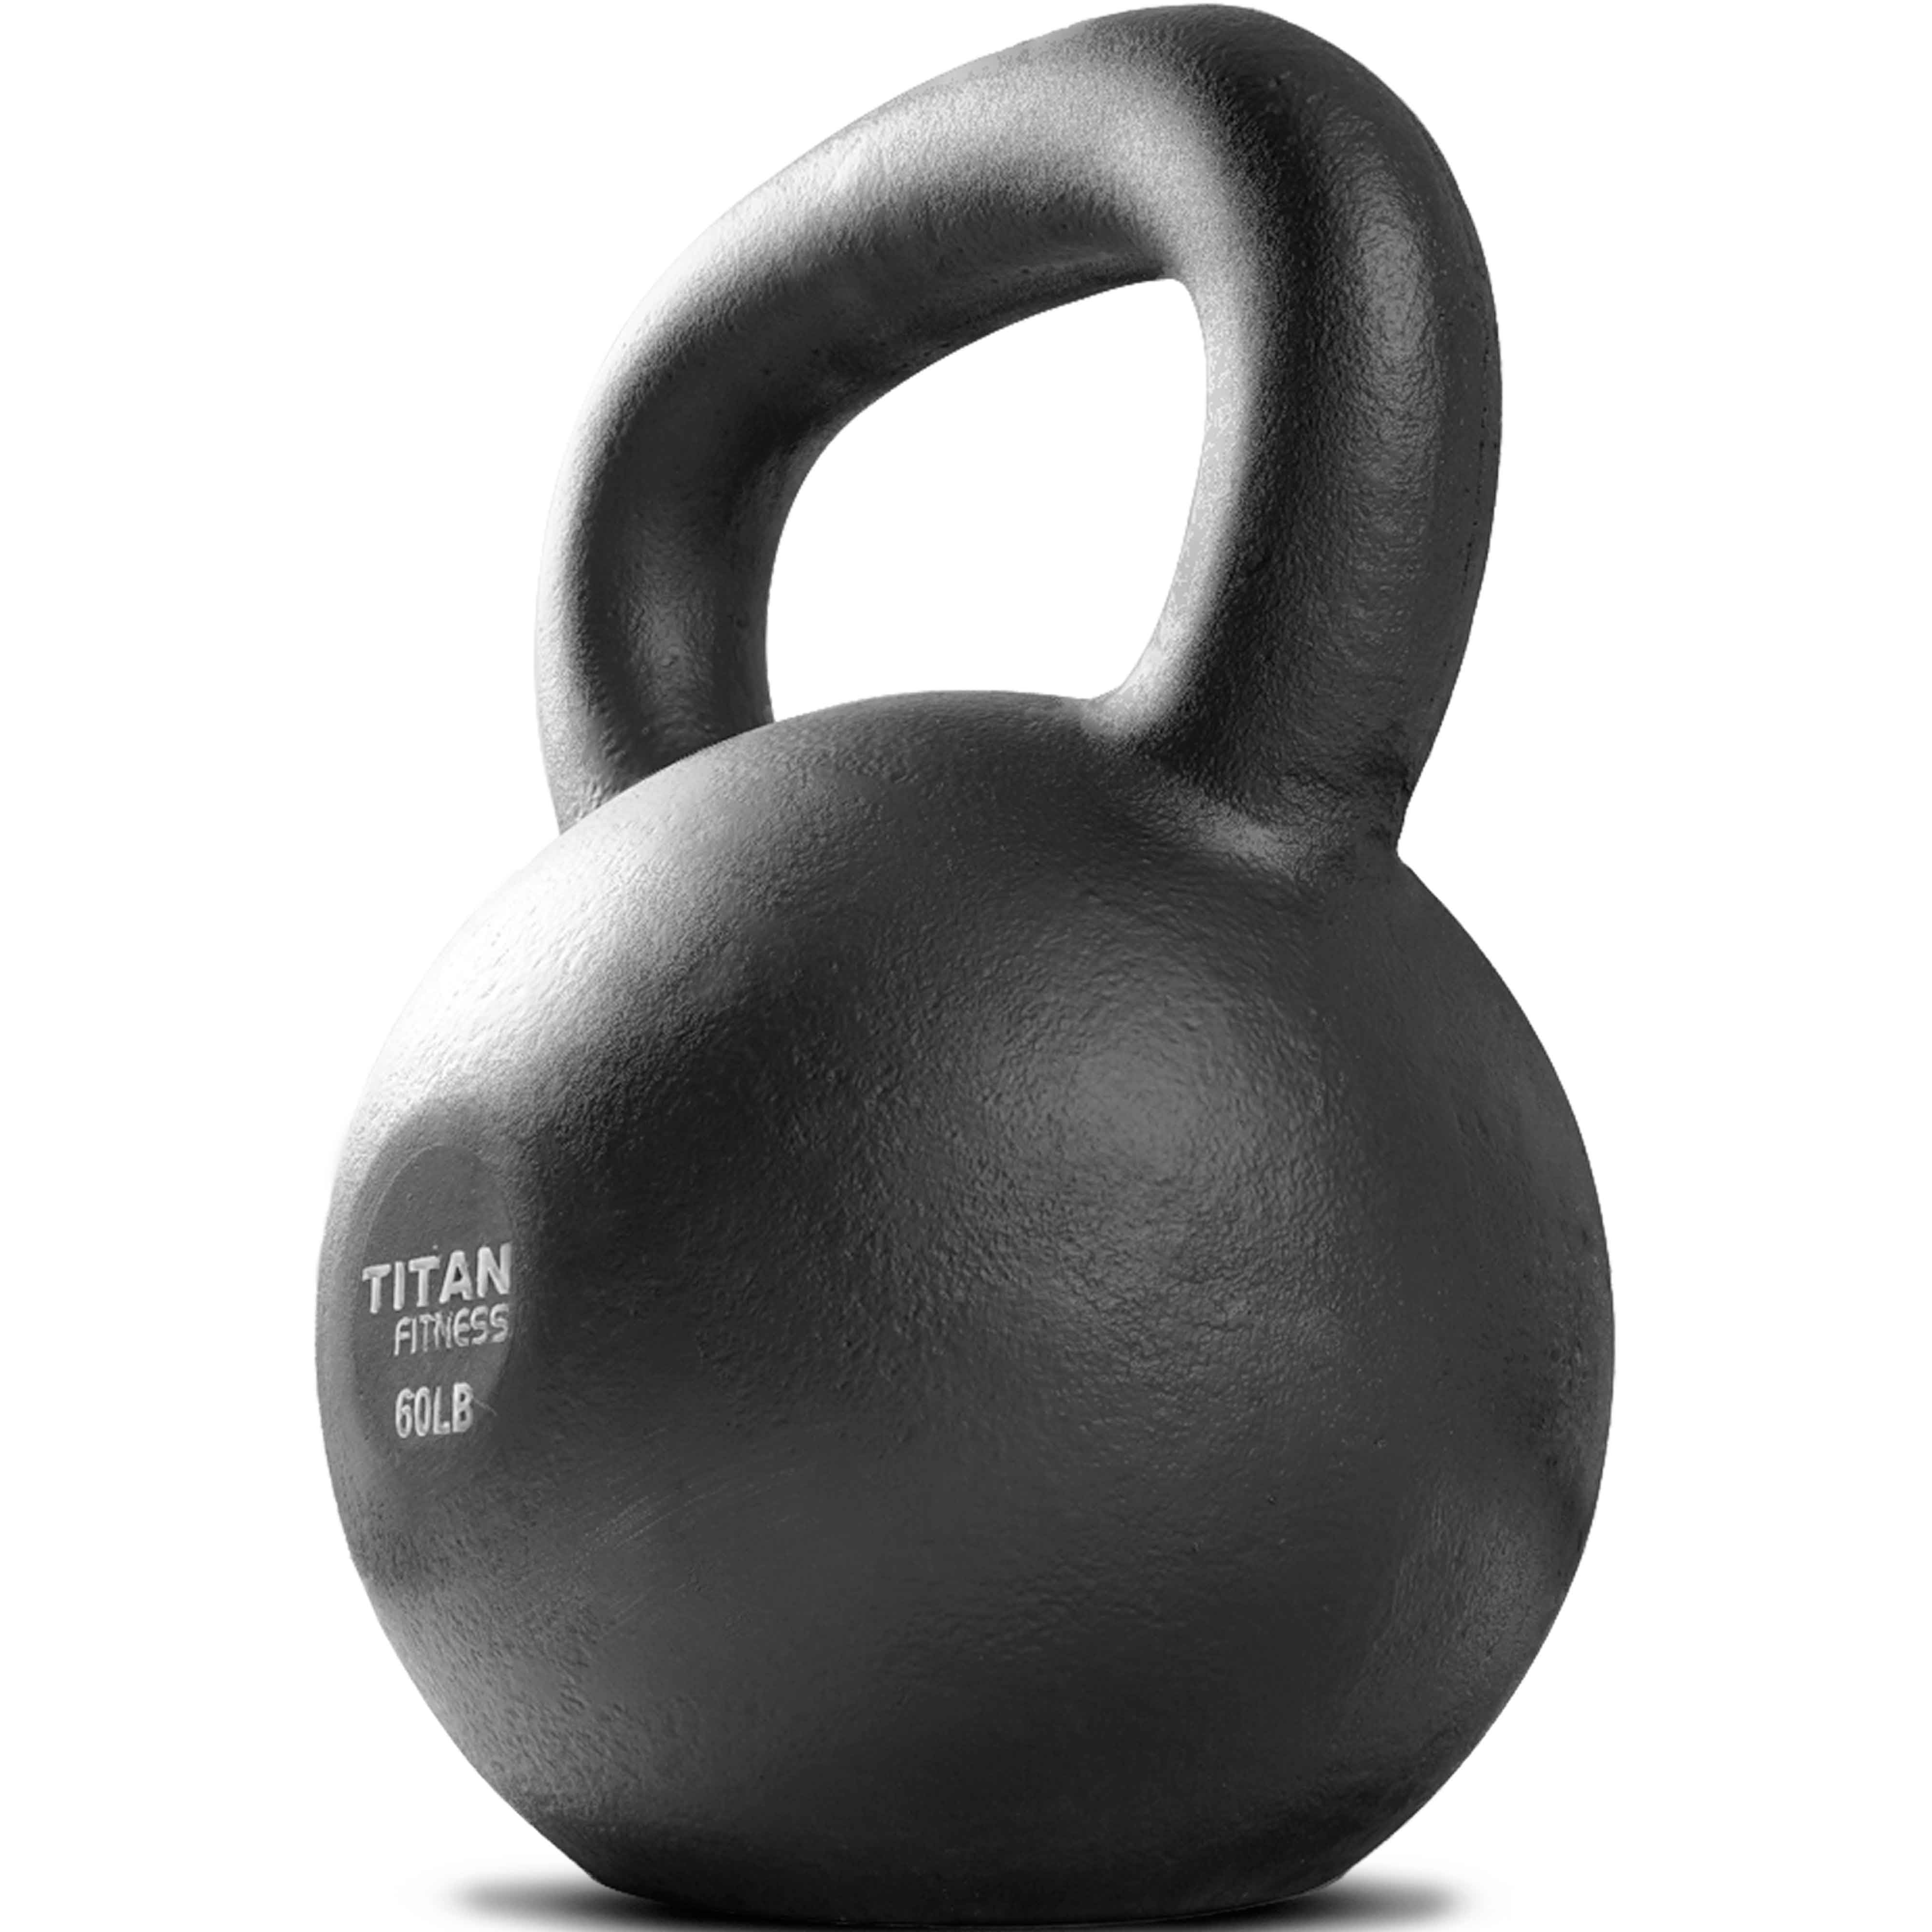 Cast Iron Kettlebell Weight 60 lb Natural Solid Titan Fitness Workout Swing 